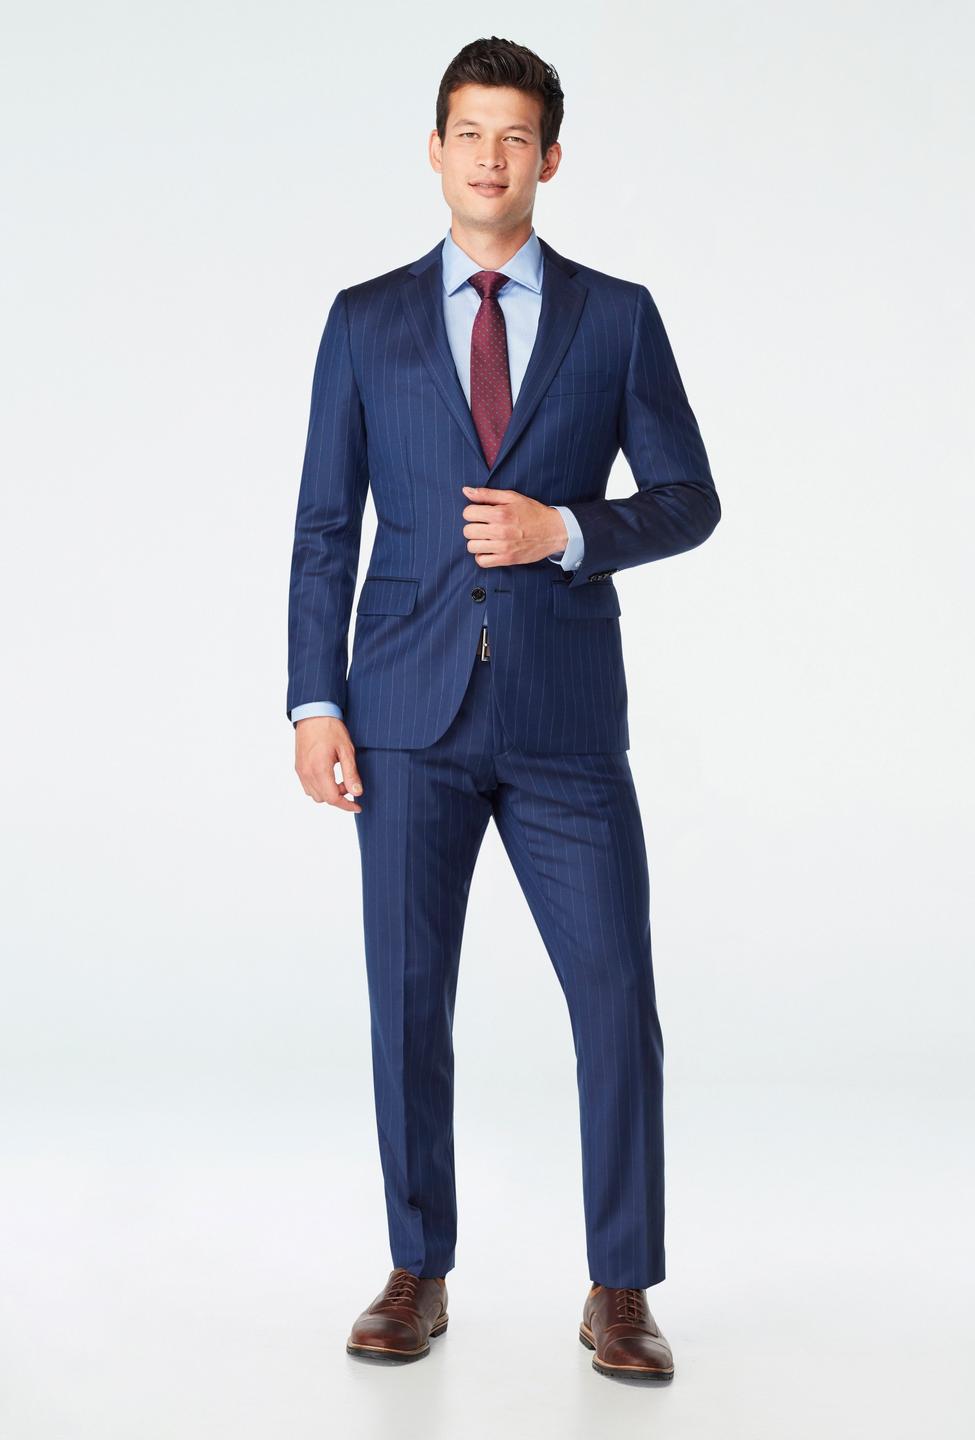 Blue suit - Hemsworth Striped Design from Premium Indochino Collection